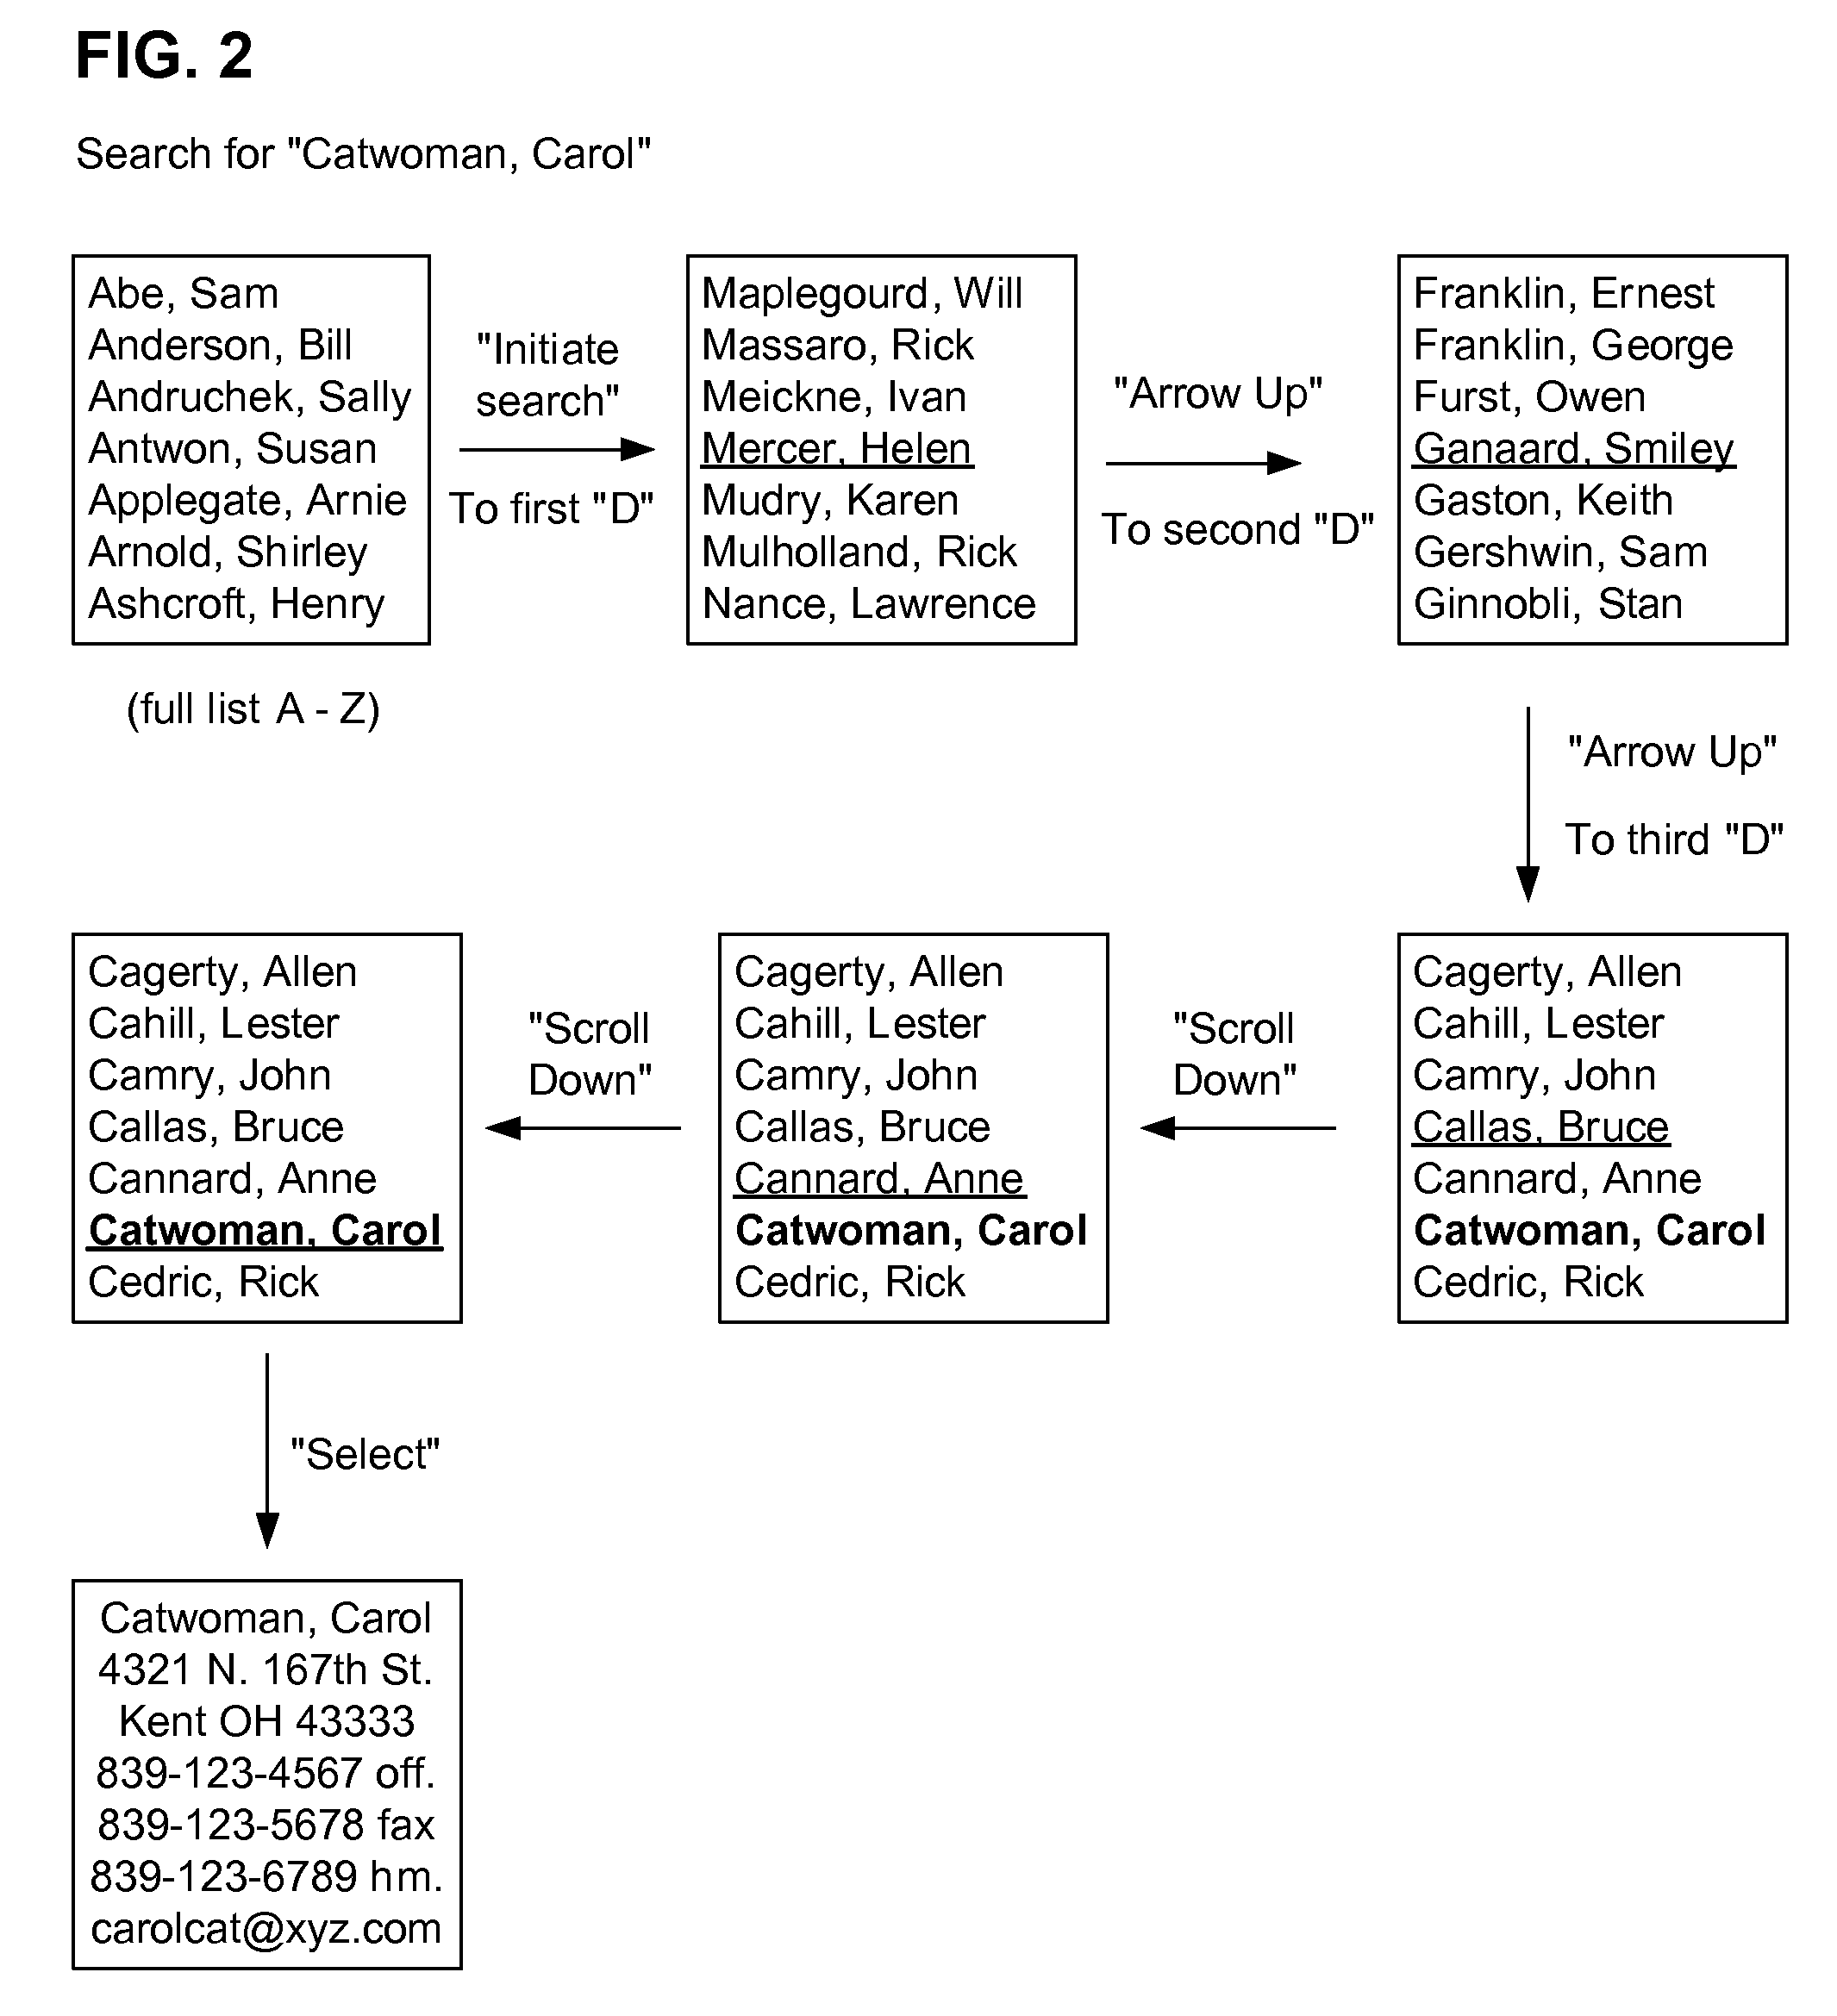 Apparatus and method for locating a target item in a list